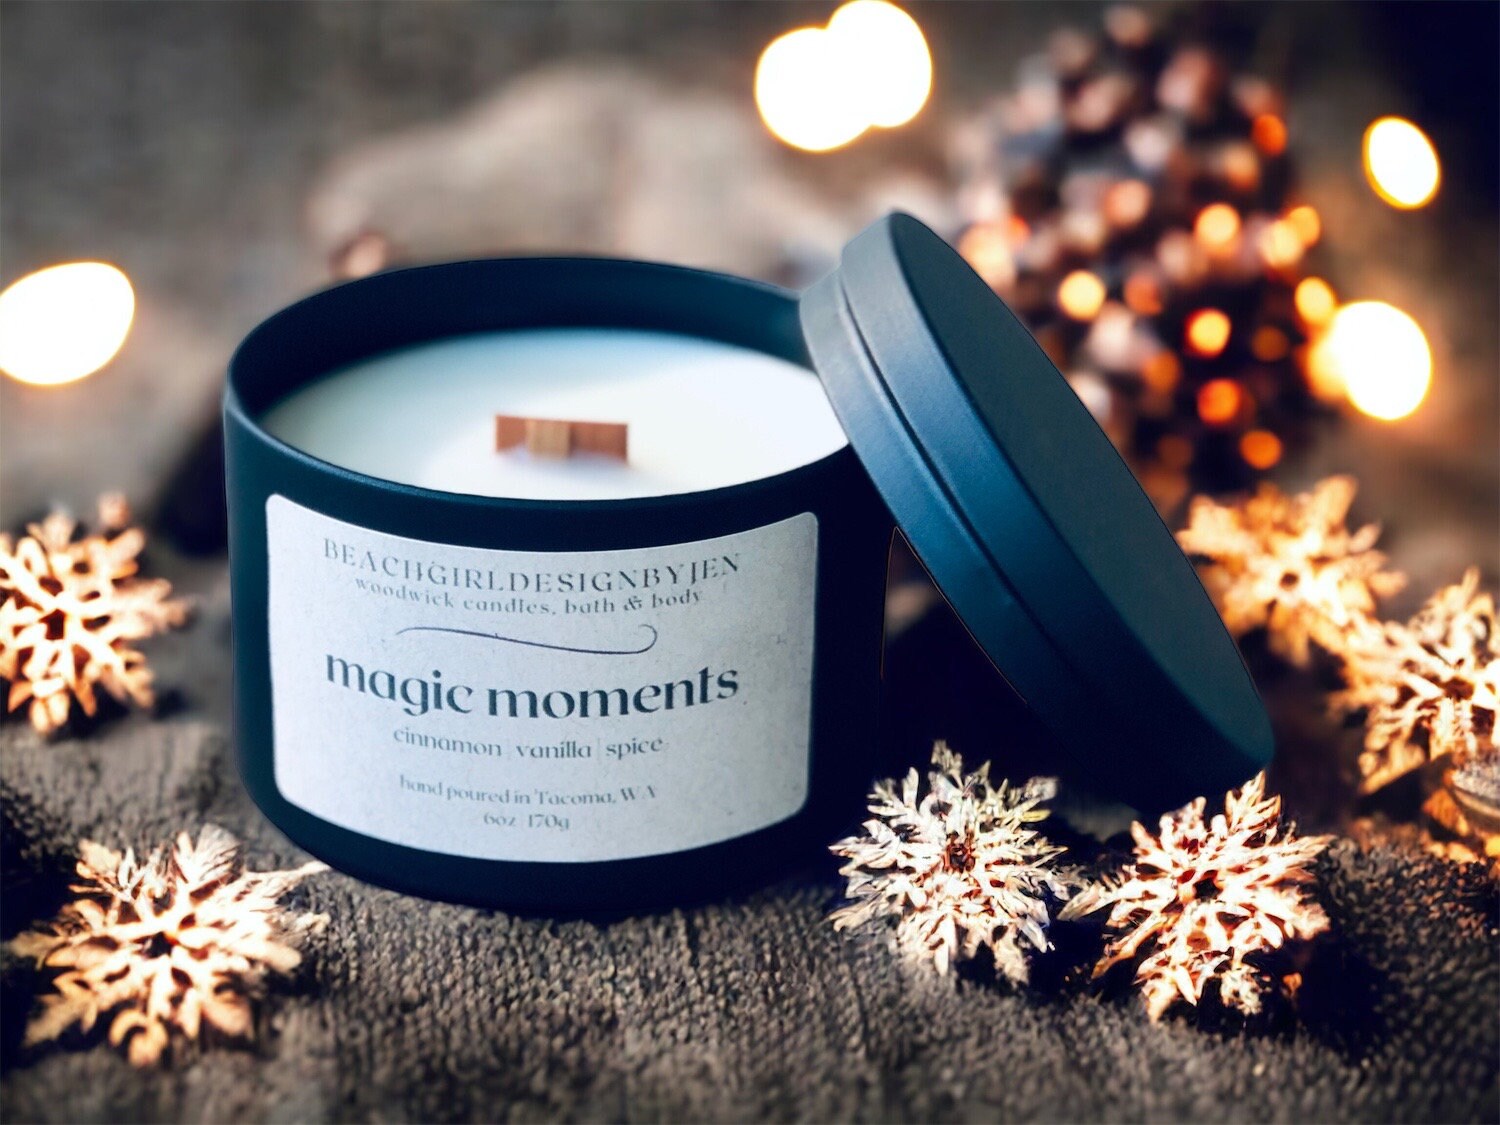 Scented Woodwick Candles